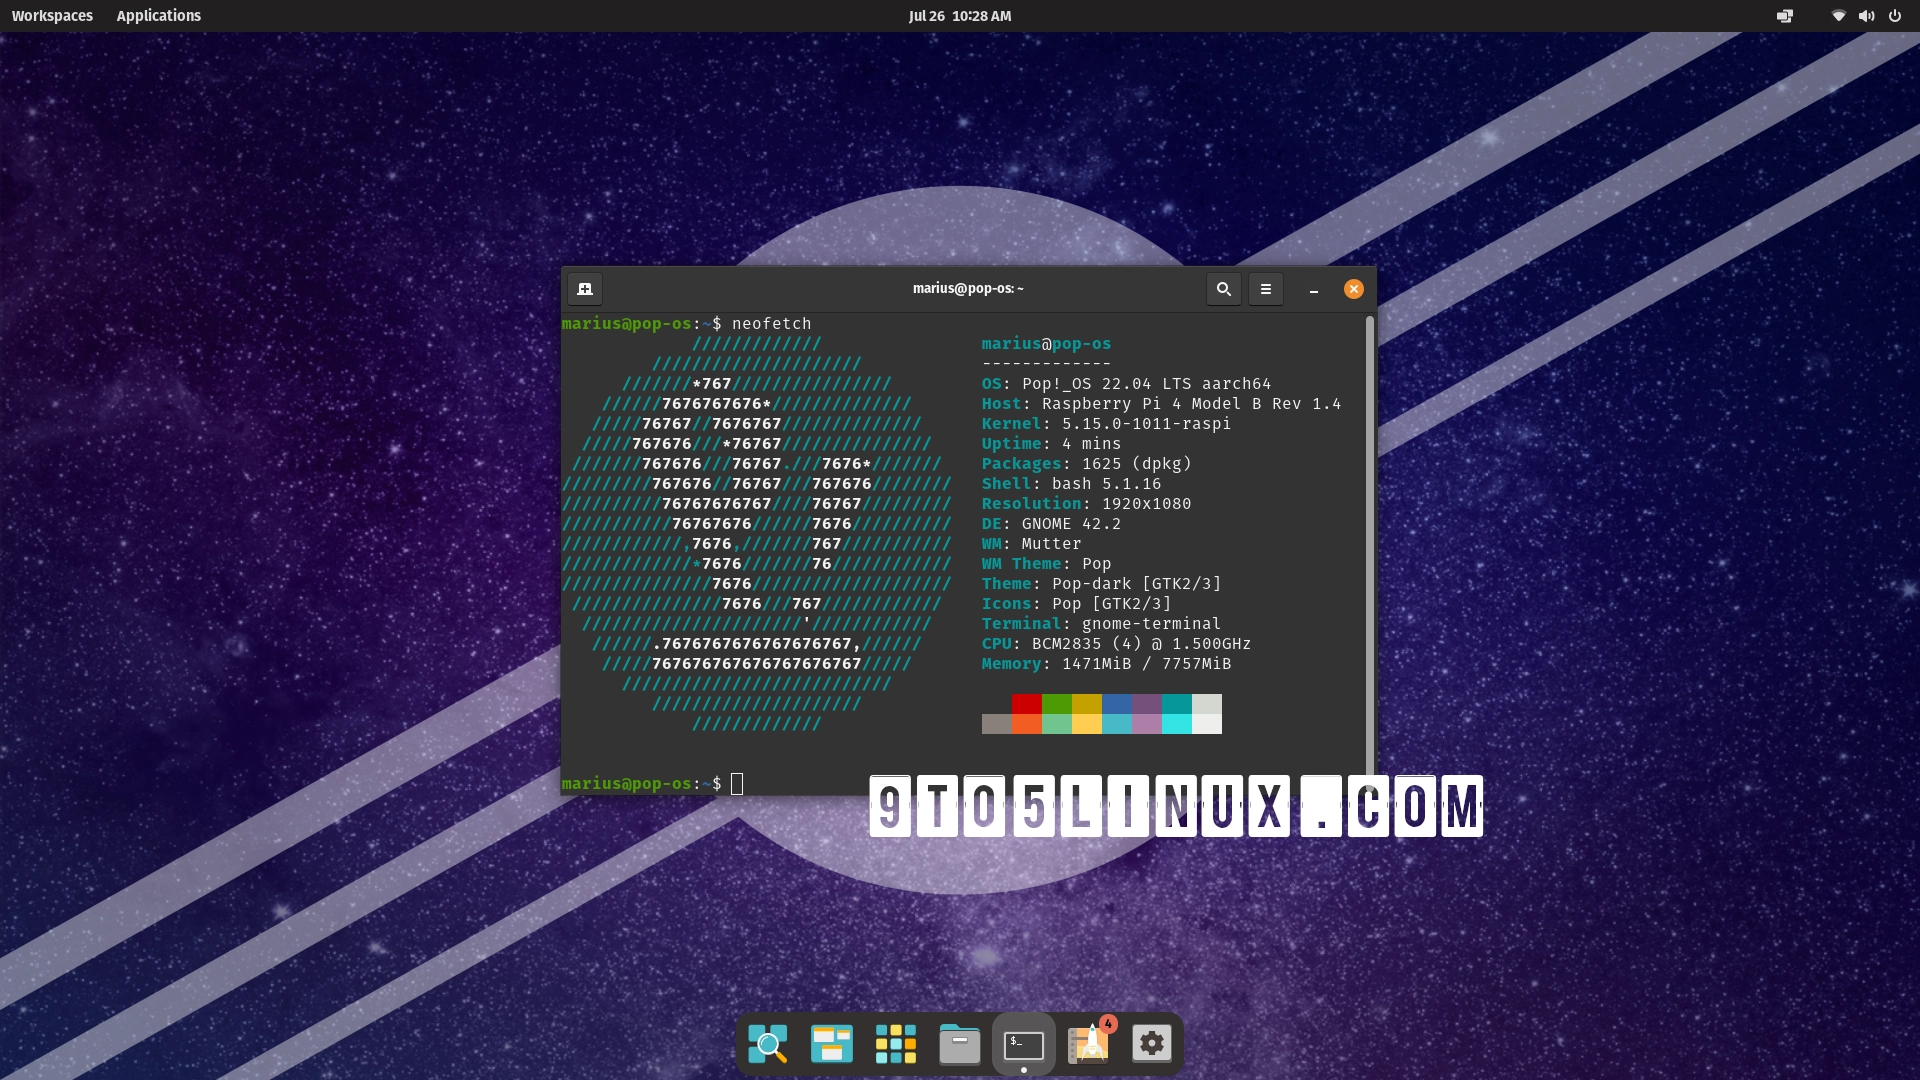 System76’s Pop!_OS Linux 22.04 Distro Is Now Available for Raspberry Pi 4 PCs